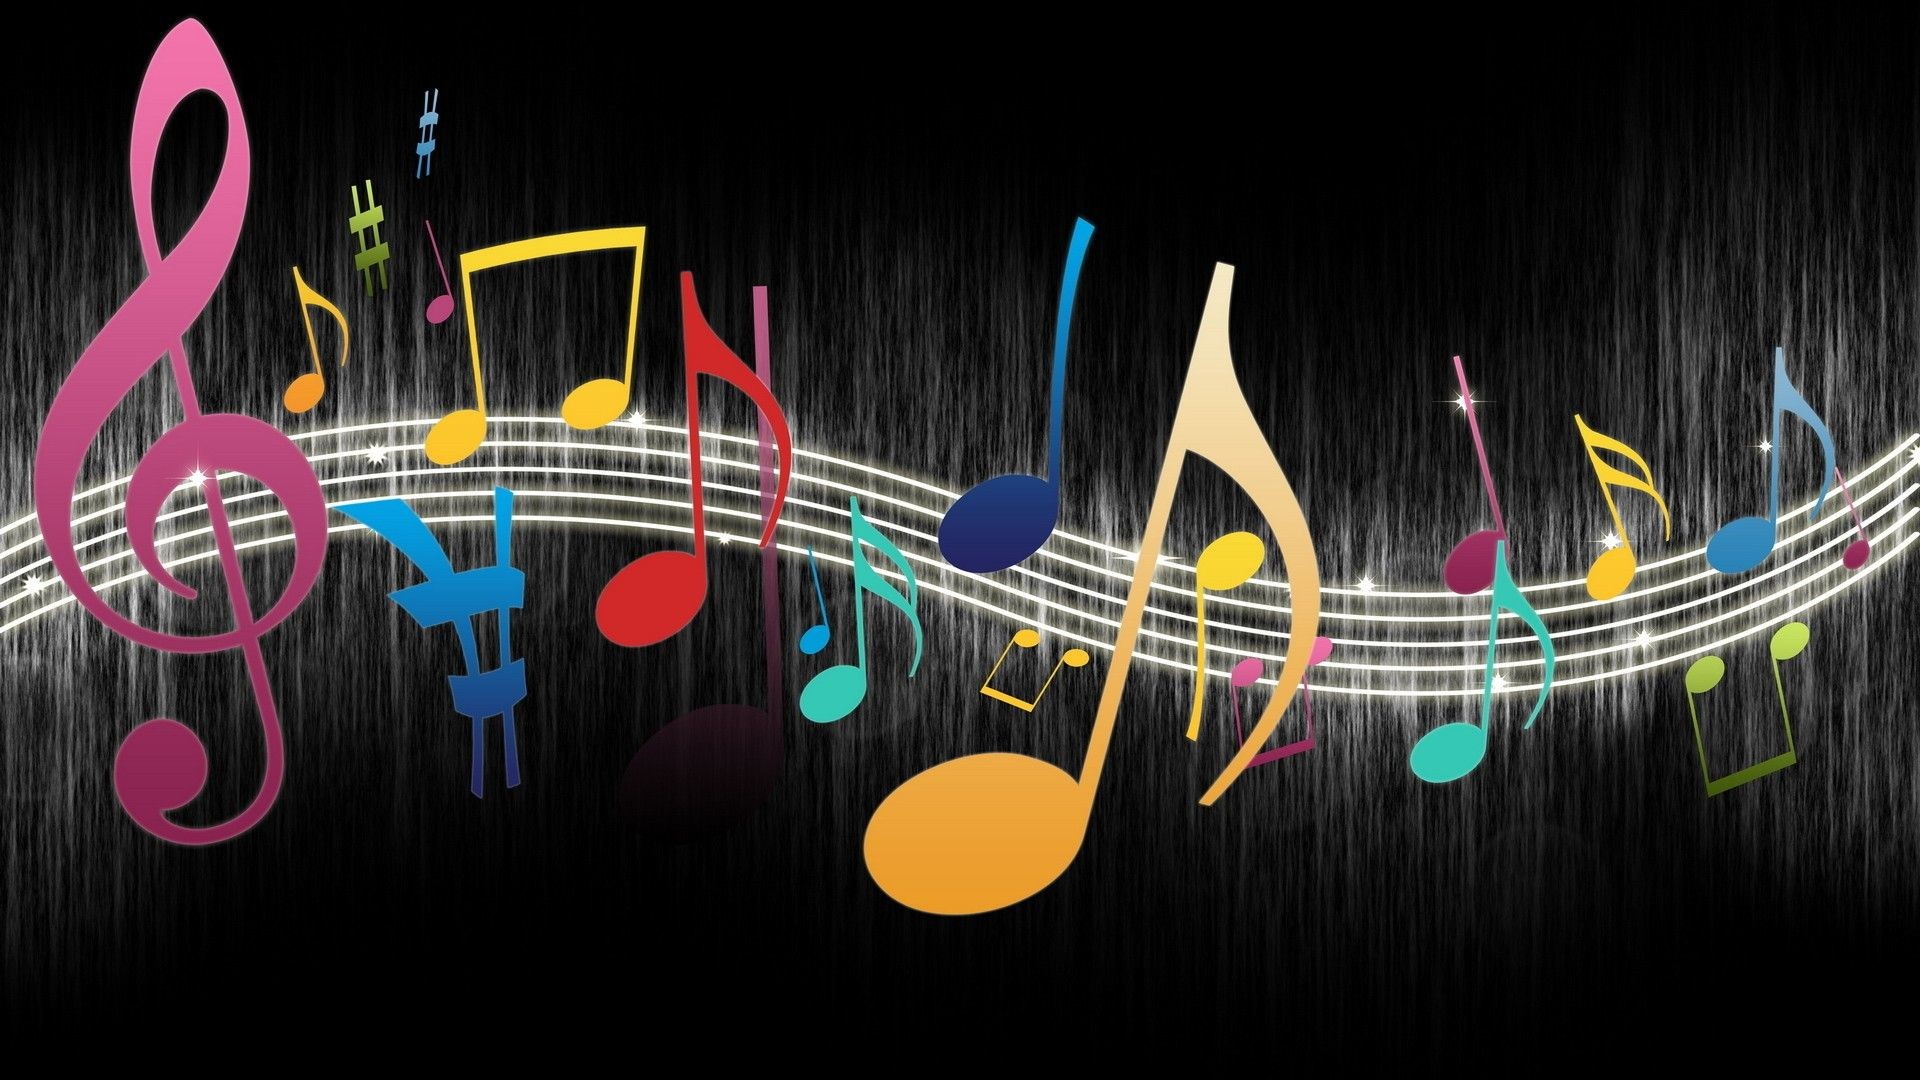 1920x1080 Colorful Music Notes Wallpaper Clipart Panda Free Clipart Images